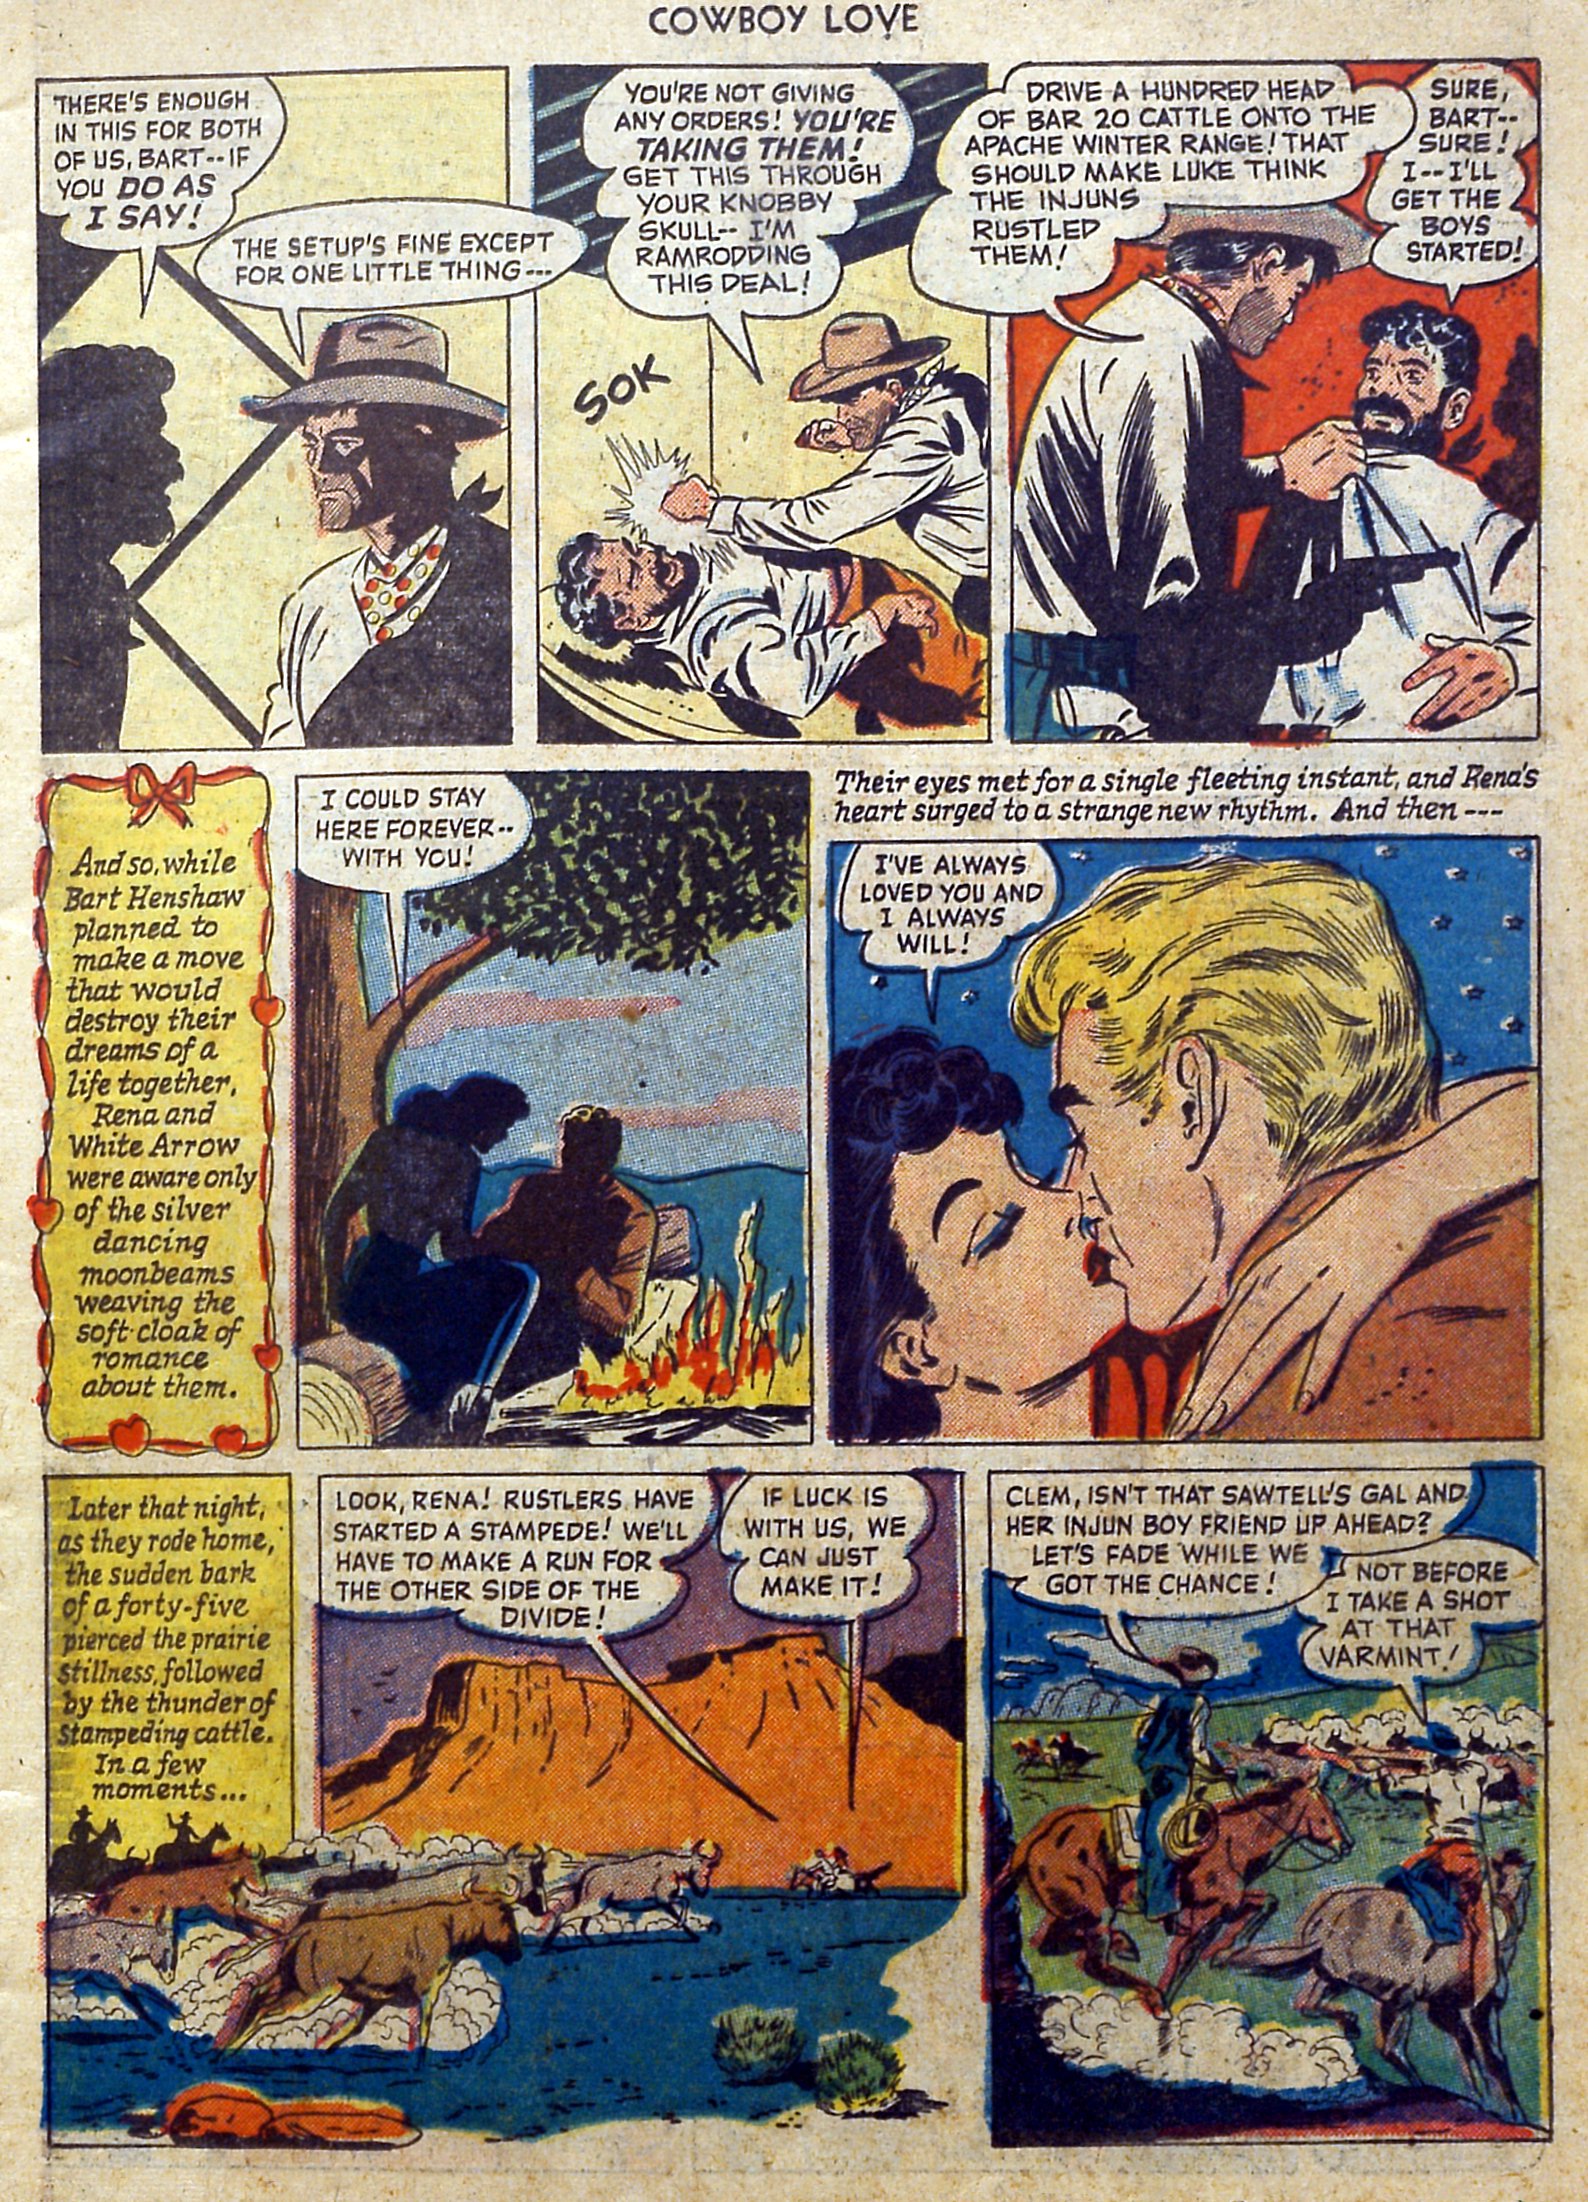 Read online Cowboy Love comic -  Issue #6 - 9